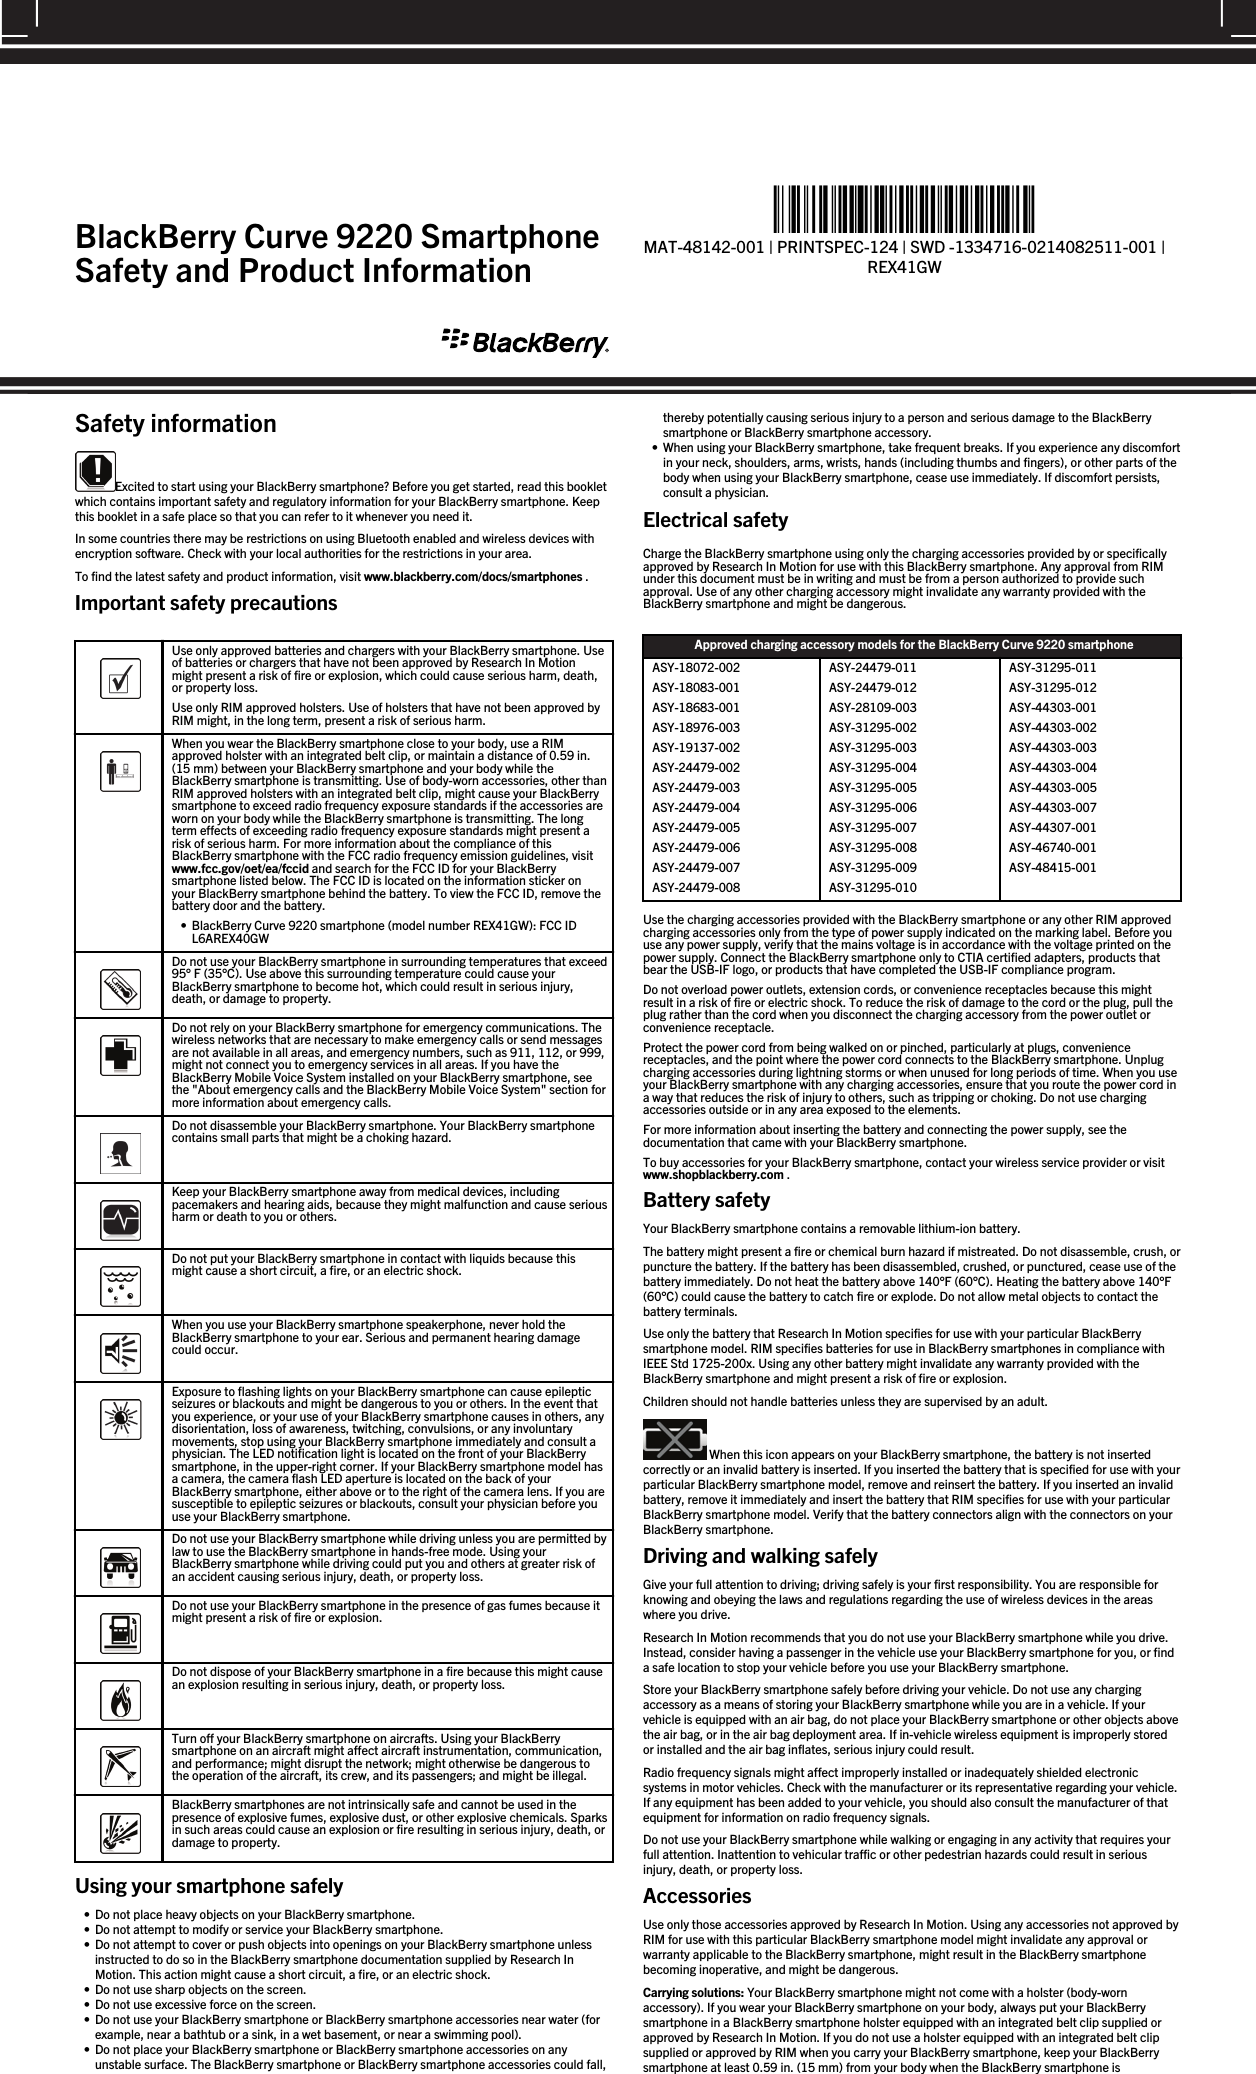 Safety informationExcited to start using your BlackBerry smartphone? Before you get started, read this bookletwhich contains important safety and regulatory information for your BlackBerry smartphone. Keepthis booklet in a safe place so that you can refer to it whenever you need it.In some countries there may be restrictions on using Bluetooth enabled and wireless devices withencryption software. Check with your local authorities for the restrictions in your area.To find the latest safety and product information, visit www.blackberry.com/docs/smartphones .Important safety precautions  Use only approved batteries and chargers with your BlackBerry smartphone. Useof batteries or chargers that have not been approved by Research In Motionmight present a risk of fire or explosion, which could cause serious harm, death,or property loss.Use only RIM approved holsters. Use of holsters that have not been approved byRIM might, in the long term, present a risk of serious harm.  When you wear the BlackBerry smartphone close to your body, use a RIMapproved holster with an integrated belt clip, or maintain a distance of 0.59 in.(15 mm) between your BlackBerry smartphone and your body while theBlackBerry smartphone is transmitting. Use of body-worn accessories, other thanRIM approved holsters with an integrated belt clip, might cause your BlackBerrysmartphone to exceed radio frequency exposure standards if the accessories areworn on your body while the BlackBerry smartphone is transmitting. The longterm effects of exceeding radio frequency exposure standards might present arisk of serious harm. For more information about the compliance of thisBlackBerry smartphone with the FCC radio frequency emission guidelines, visitwww.fcc.gov/oet/ea/fccid and search for the FCC ID for your BlackBerrysmartphone listed below. The FCC ID is located on the information sticker onyour BlackBerry smartphone behind the battery. To view the FCC ID, remove thebattery door and the battery.• BlackBerry Curve 9220 smartphone (model number REX41GW): FCC IDL6AREX40GW  Do not use your BlackBerry smartphone in surrounding temperatures that exceed95° F (35°C). Use above this surrounding temperature could cause yourBlackBerry smartphone to become hot, which could result in serious injury,death, or damage to property.  Do not rely on your BlackBerry smartphone for emergency communications. Thewireless networks that are necessary to make emergency calls or send messagesare not available in all areas, and emergency numbers, such as 911, 112, or 999,might not connect you to emergency services in all areas. If you have theBlackBerry Mobile Voice System installed on your BlackBerry smartphone, seethe &quot;About emergency calls and the BlackBerry Mobile Voice System&quot; section formore information about emergency calls.  Do not disassemble your BlackBerry smartphone. Your BlackBerry smartphonecontains small parts that might be a choking hazard.  Keep your BlackBerry smartphone away from medical devices, includingpacemakers and hearing aids, because they might malfunction and cause seriousharm or death to you or others.  Do not put your BlackBerry smartphone in contact with liquids because thismight cause a short circuit, a fire, or an electric shock.  When you use your BlackBerry smartphone speakerphone, never hold theBlackBerry smartphone to your ear. Serious and permanent hearing damagecould occur.  Exposure to flashing lights on your BlackBerry smartphone can cause epilepticseizures or blackouts and might be dangerous to you or others. In the event thatyou experience, or your use of your BlackBerry smartphone causes in others, anydisorientation, loss of awareness, twitching, convulsions, or any involuntarymovements, stop using your BlackBerry smartphone immediately and consult aphysician. The LED notification light is located on the front of your BlackBerrysmartphone, in the upper-right corner. If your BlackBerry smartphone model hasa camera, the camera flash LED aperture is located on the back of yourBlackBerry smartphone, either above or to the right of the camera lens. If you aresusceptible to epileptic seizures or blackouts, consult your physician before youuse your BlackBerry smartphone.  Do not use your BlackBerry smartphone while driving unless you are permitted bylaw to use the BlackBerry smartphone in hands-free mode. Using yourBlackBerry smartphone while driving could put you and others at greater risk ofan accident causing serious injury, death, or property loss.  Do not use your BlackBerry smartphone in the presence of gas fumes because itmight present a risk of fire or explosion.  Do not dispose of your BlackBerry smartphone in a fire because this might causean explosion resulting in serious injury, death, or property loss.  Turn off your BlackBerry smartphone on aircrafts. Using your BlackBerrysmartphone on an aircraft might affect aircraft instrumentation, communication,and performance; might disrupt the network; might otherwise be dangerous tothe operation of the aircraft, its crew, and its passengers; and might be illegal.  BlackBerry smartphones are not intrinsically safe and cannot be used in thepresence of explosive fumes, explosive dust, or other explosive chemicals. Sparksin such areas could cause an explosion or fire resulting in serious injury, death, ordamage to property.Using your smartphone safely• Do not place heavy objects on your BlackBerry smartphone.• Do not attempt to modify or service your BlackBerry smartphone.• Do not attempt to cover or push objects into openings on your BlackBerry smartphone unlessinstructed to do so in the BlackBerry smartphone documentation supplied by Research InMotion. This action might cause a short circuit, a fire, or an electric shock.• Do not use sharp objects on the screen.• Do not use excessive force on the screen.• Do not use your BlackBerry smartphone or BlackBerry smartphone accessories near water (forexample, near a bathtub or a sink, in a wet basement, or near a swimming pool).• Do not place your BlackBerry smartphone or BlackBerry smartphone accessories on anyunstable surface. The BlackBerry smartphone or BlackBerry smartphone accessories could fall,thereby potentially causing serious injury to a person and serious damage to the BlackBerrysmartphone or BlackBerry smartphone accessory.• When using your BlackBerry smartphone, take frequent breaks. If you experience any discomfortin your neck, shoulders, arms, wrists, hands (including thumbs and fingers), or other parts of thebody when using your BlackBerry smartphone, cease use immediately. If discomfort persists,consult a physician.Electrical safetyCharge the BlackBerry smartphone using only the charging accessories provided by or specificallyapproved by Research In Motion for use with this BlackBerry smartphone. Any approval from RIMunder this document must be in writing and must be from a person authorized to provide suchapproval. Use of any other charging accessory might invalidate any warranty provided with theBlackBerry smartphone and might be dangerous.Approved charging accessory models for the BlackBerry Curve 9220 smartphoneASY-18072-002ASY-18083-001ASY-18683-001ASY-18976-003ASY-19137-002ASY-24479-002ASY-24479-003ASY-24479-004ASY-24479-005ASY-24479-006ASY-24479-007ASY-24479-008ASY-24479-011ASY-24479-012ASY-28109-003ASY-31295-002ASY-31295-003ASY-31295-004ASY-31295-005ASY-31295-006ASY-31295-007ASY-31295-008ASY-31295-009ASY-31295-010ASY-31295-011ASY-31295-012ASY-44303-001ASY-44303-002ASY-44303-003ASY-44303-004ASY-44303-005ASY-44303-007ASY-44307-001ASY-46740-001ASY-48415-001Use the charging accessories provided with the BlackBerry smartphone or any other RIM approvedcharging accessories only from the type of power supply indicated on the marking label. Before youuse any power supply, verify that the mains voltage is in accordance with the voltage printed on thepower supply. Connect the BlackBerry smartphone only to CTIA certified adapters, products thatbear the USB-IF logo, or products that have completed the USB-IF compliance program.Do not overload power outlets, extension cords, or convenience receptacles because this mightresult in a risk of fire or electric shock. To reduce the risk of damage to the cord or the plug, pull theplug rather than the cord when you disconnect the charging accessory from the power outlet orconvenience receptacle.Protect the power cord from being walked on or pinched, particularly at plugs, conveniencereceptacles, and the point where the power cord connects to the BlackBerry smartphone. Unplugcharging accessories during lightning storms or when unused for long periods of time. When you useyour BlackBerry smartphone with any charging accessories, ensure that you route the power cord ina way that reduces the risk of injury to others, such as tripping or choking. Do not use chargingaccessories outside or in any area exposed to the elements.For more information about inserting the battery and connecting the power supply, see thedocumentation that came with your BlackBerry smartphone.To buy accessories for your BlackBerry smartphone, contact your wireless service provider or visitwww.shopblackberry.com .Battery safetyYour BlackBerry smartphone contains a removable lithium-ion battery.The battery might present a fire or chemical burn hazard if mistreated. Do not disassemble, crush, orpuncture the battery. If the battery has been disassembled, crushed, or punctured, cease use of thebattery immediately. Do not heat the battery above 140°F (60°C). Heating the battery above 140°F(60°C) could cause the battery to catch fire or explode. Do not allow metal objects to contact thebattery terminals.Use only the battery that Research In Motion specifies for use with your particular BlackBerrysmartphone model. RIM specifies batteries for use in BlackBerry smartphones in compliance withIEEE Std 1725-200x. Using any other battery might invalidate any warranty provided with theBlackBerry smartphone and might present a risk of fire or explosion.Children should not handle batteries unless they are supervised by an adult. When this icon appears on your BlackBerry smartphone, the battery is not insertedcorrectly or an invalid battery is inserted. If you inserted the battery that is specified for use with yourparticular BlackBerry smartphone model, remove and reinsert the battery. If you inserted an invalidbattery, remove it immediately and insert the battery that RIM specifies for use with your particularBlackBerry smartphone model. Verify that the battery connectors align with the connectors on yourBlackBerry smartphone.Driving and walking safelyGive your full attention to driving; driving safely is your first responsibility. You are responsible forknowing and obeying the laws and regulations regarding the use of wireless devices in the areaswhere you drive.Research In Motion recommends that you do not use your BlackBerry smartphone while you drive.Instead, consider having a passenger in the vehicle use your BlackBerry smartphone for you, or finda safe location to stop your vehicle before you use your BlackBerry smartphone.Store your BlackBerry smartphone safely before driving your vehicle. Do not use any chargingaccessory as a means of storing your BlackBerry smartphone while you are in a vehicle. If yourvehicle is equipped with an air bag, do not place your BlackBerry smartphone or other objects abovethe air bag, or in the air bag deployment area. If in-vehicle wireless equipment is improperly storedor installed and the air bag inflates, serious injury could result.Radio frequency signals might affect improperly installed or inadequately shielded electronicsystems in motor vehicles. Check with the manufacturer or its representative regarding your vehicle.If any equipment has been added to your vehicle, you should also consult the manufacturer of thatequipment for information on radio frequency signals.Do not use your BlackBerry smartphone while walking or engaging in any activity that requires yourfull attention. Inattention to vehicular traffic or other pedestrian hazards could result in seriousinjury, death, or property loss.AccessoriesUse only those accessories approved by Research In Motion. Using any accessories not approved byRIM for use with this particular BlackBerry smartphone model might invalidate any approval orwarranty applicable to the BlackBerry smartphone, might result in the BlackBerry smartphonebecoming inoperative, and might be dangerous.Carrying solutions: Your BlackBerry smartphone might not come with a holster (body-wornaccessory). If you wear your BlackBerry smartphone on your body, always put your BlackBerrysmartphone in a BlackBerry smartphone holster equipped with an integrated belt clip supplied orapproved by Research In Motion. If you do not use a holster equipped with an integrated belt clipsupplied or approved by RIM when you carry your BlackBerry smartphone, keep your BlackBerrysmartphone at least 0.59 in. (15 mm) from your body when the BlackBerry smartphone isBlackBerry Curve 9220 SmartphoneSafety and Product Information%&quot;$!)&apos;!#&apos;%+!&quot;%*)!-&amp;&quot;))&quot;&amp;&quot;*%&amp;&quot;)&amp;*!&quot;%*&quot;)&amp;&quot;)&amp;&quot;*%%*&quot;&apos;)!1MAT-48142-001 | PRINTSPEC-124 | SWD -1334716-0214082511-001 |REX41GW